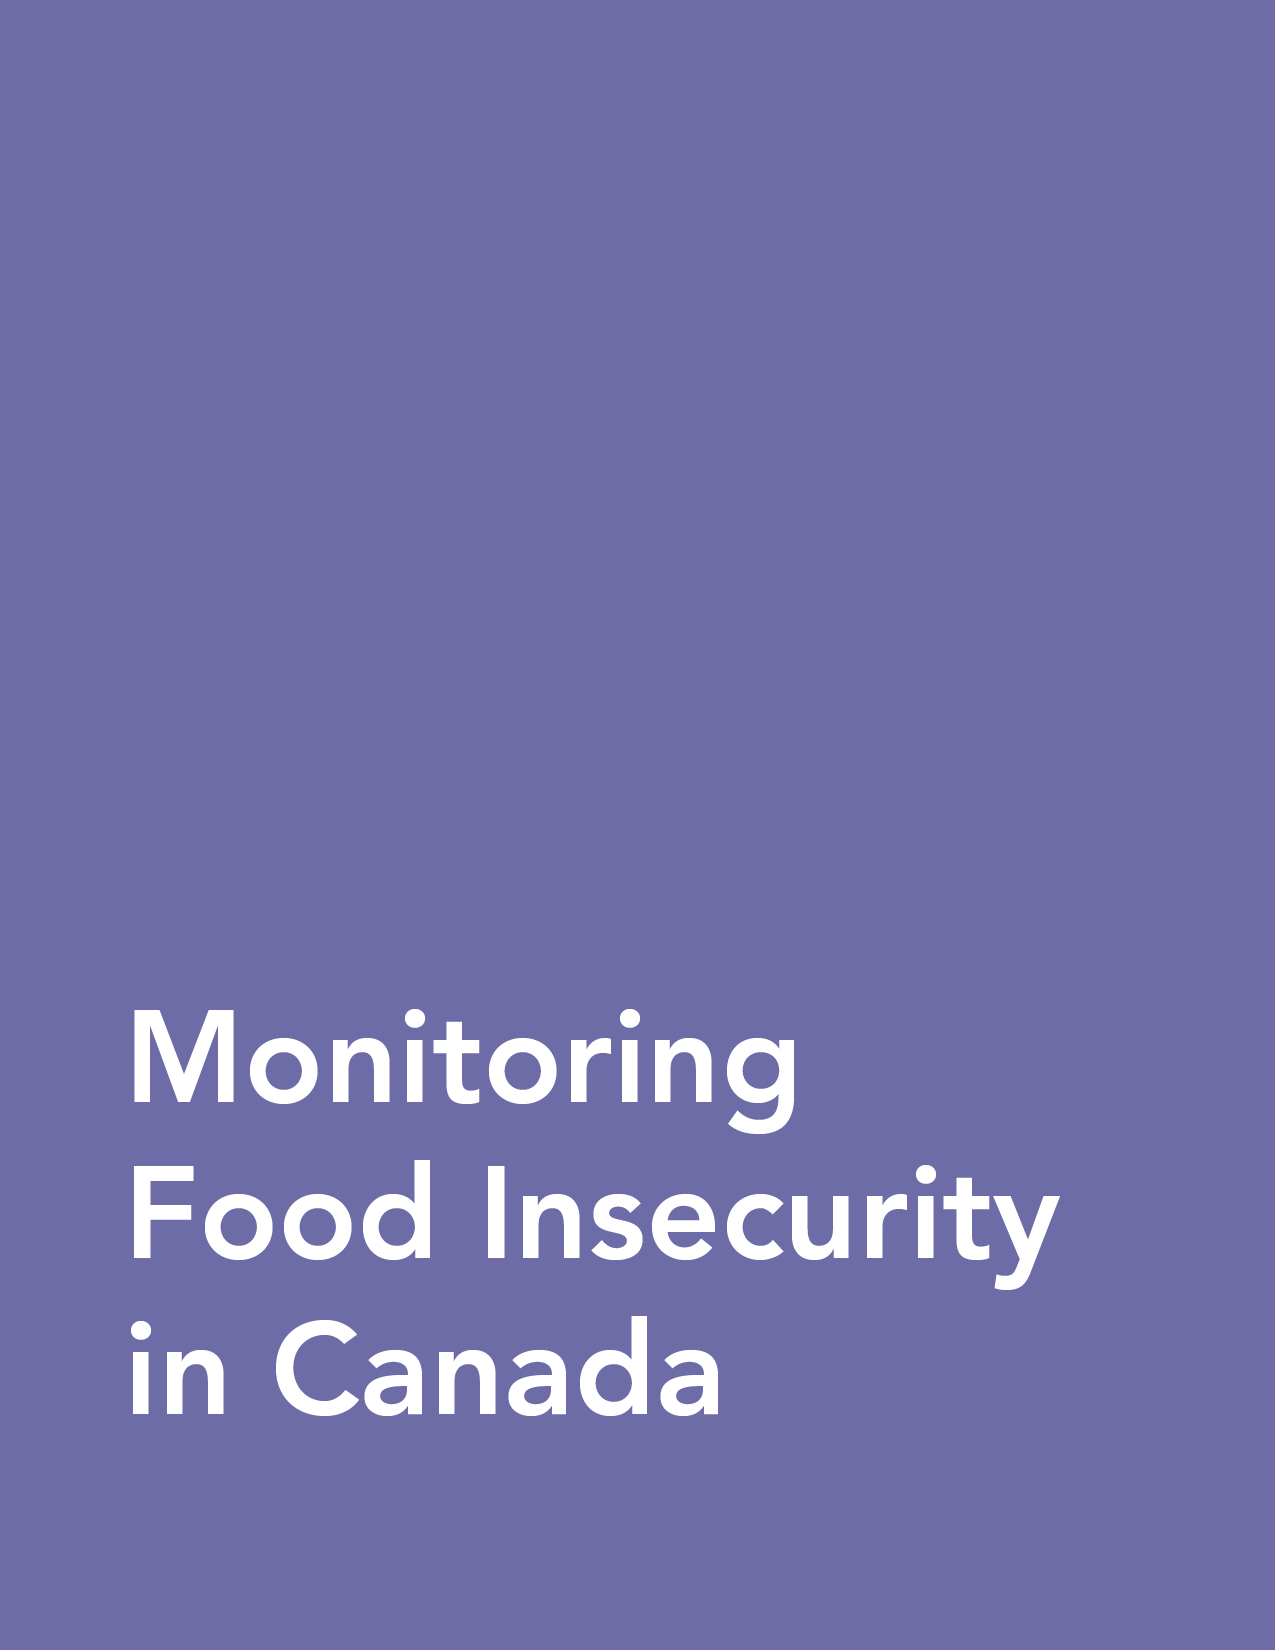 Fact Sheet: Monitoring Food Insecurity in Canada